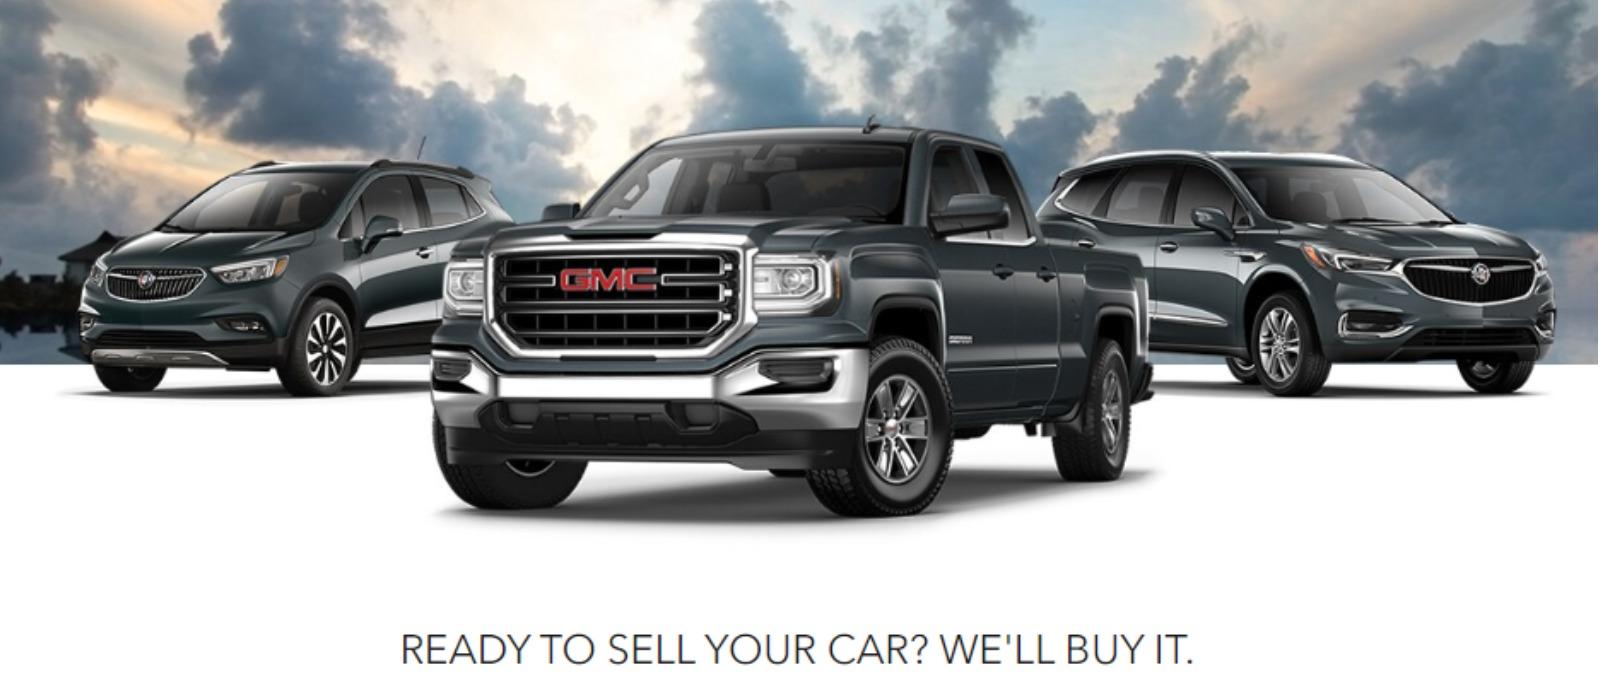 READY TO SELL YOUR CAR? WE'LL BUY IT.